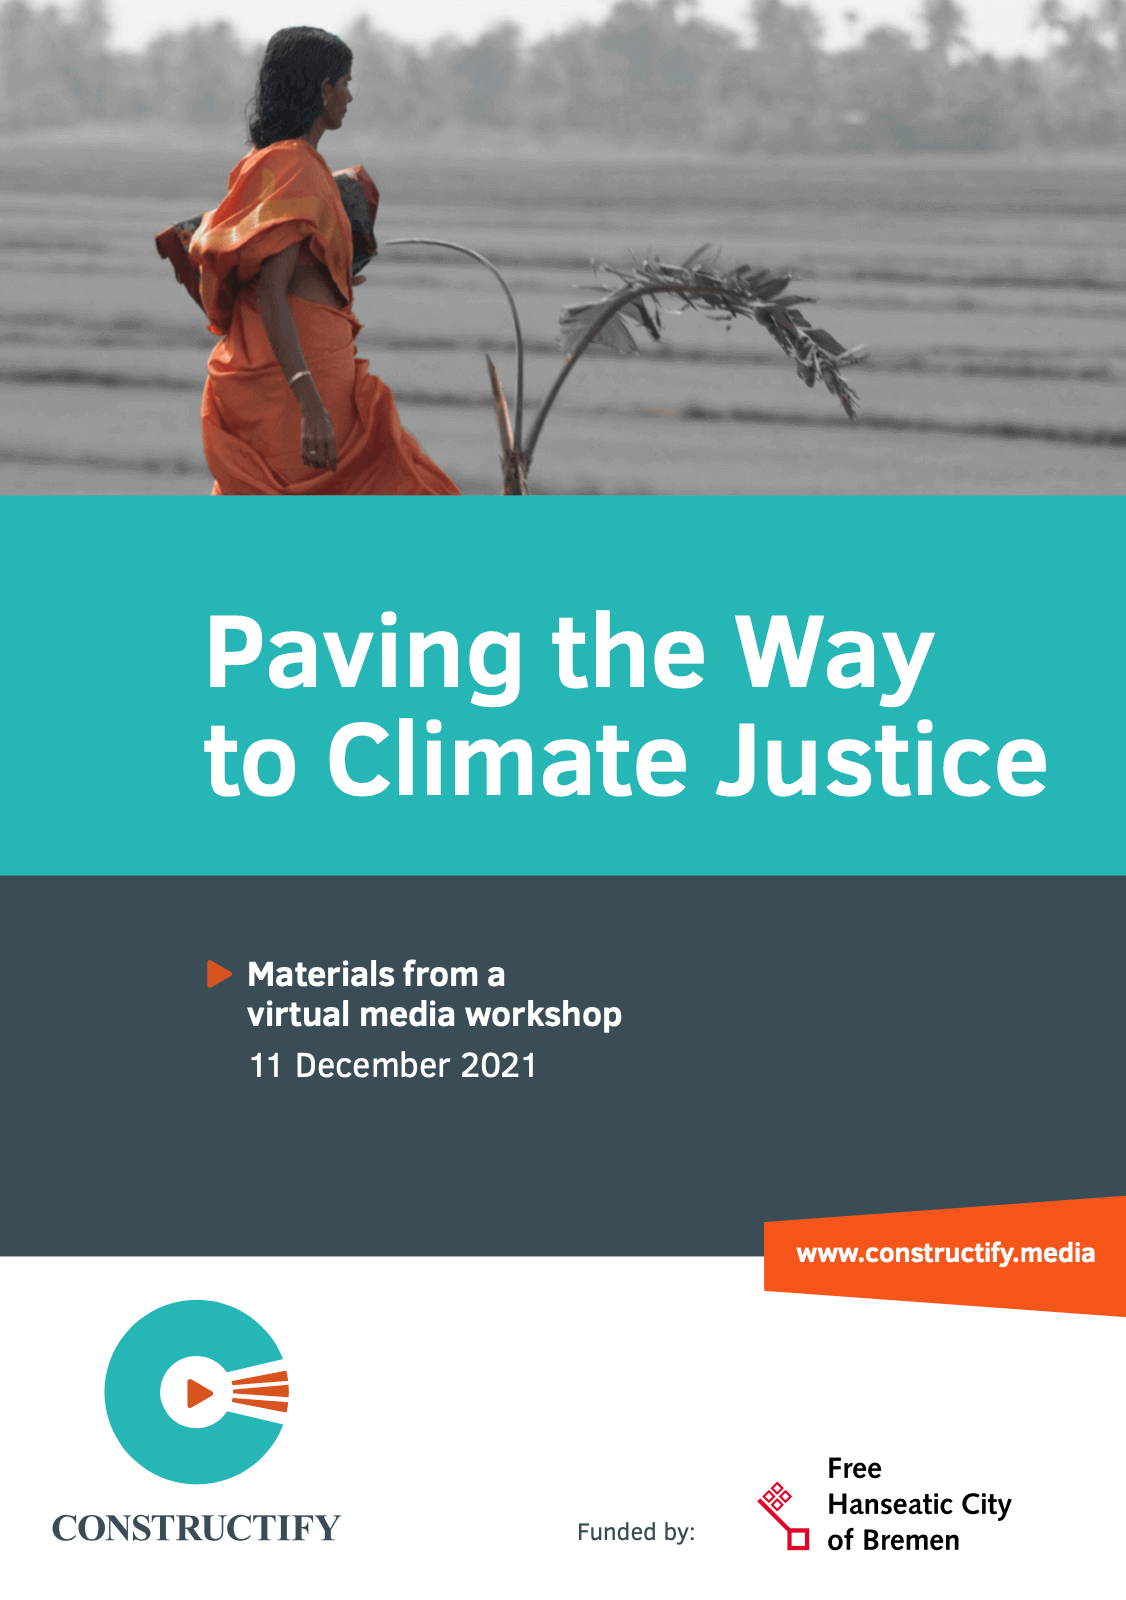 Paving the Way to Climate Justice: Materials from a virtual media workshop 11 Dec 2021